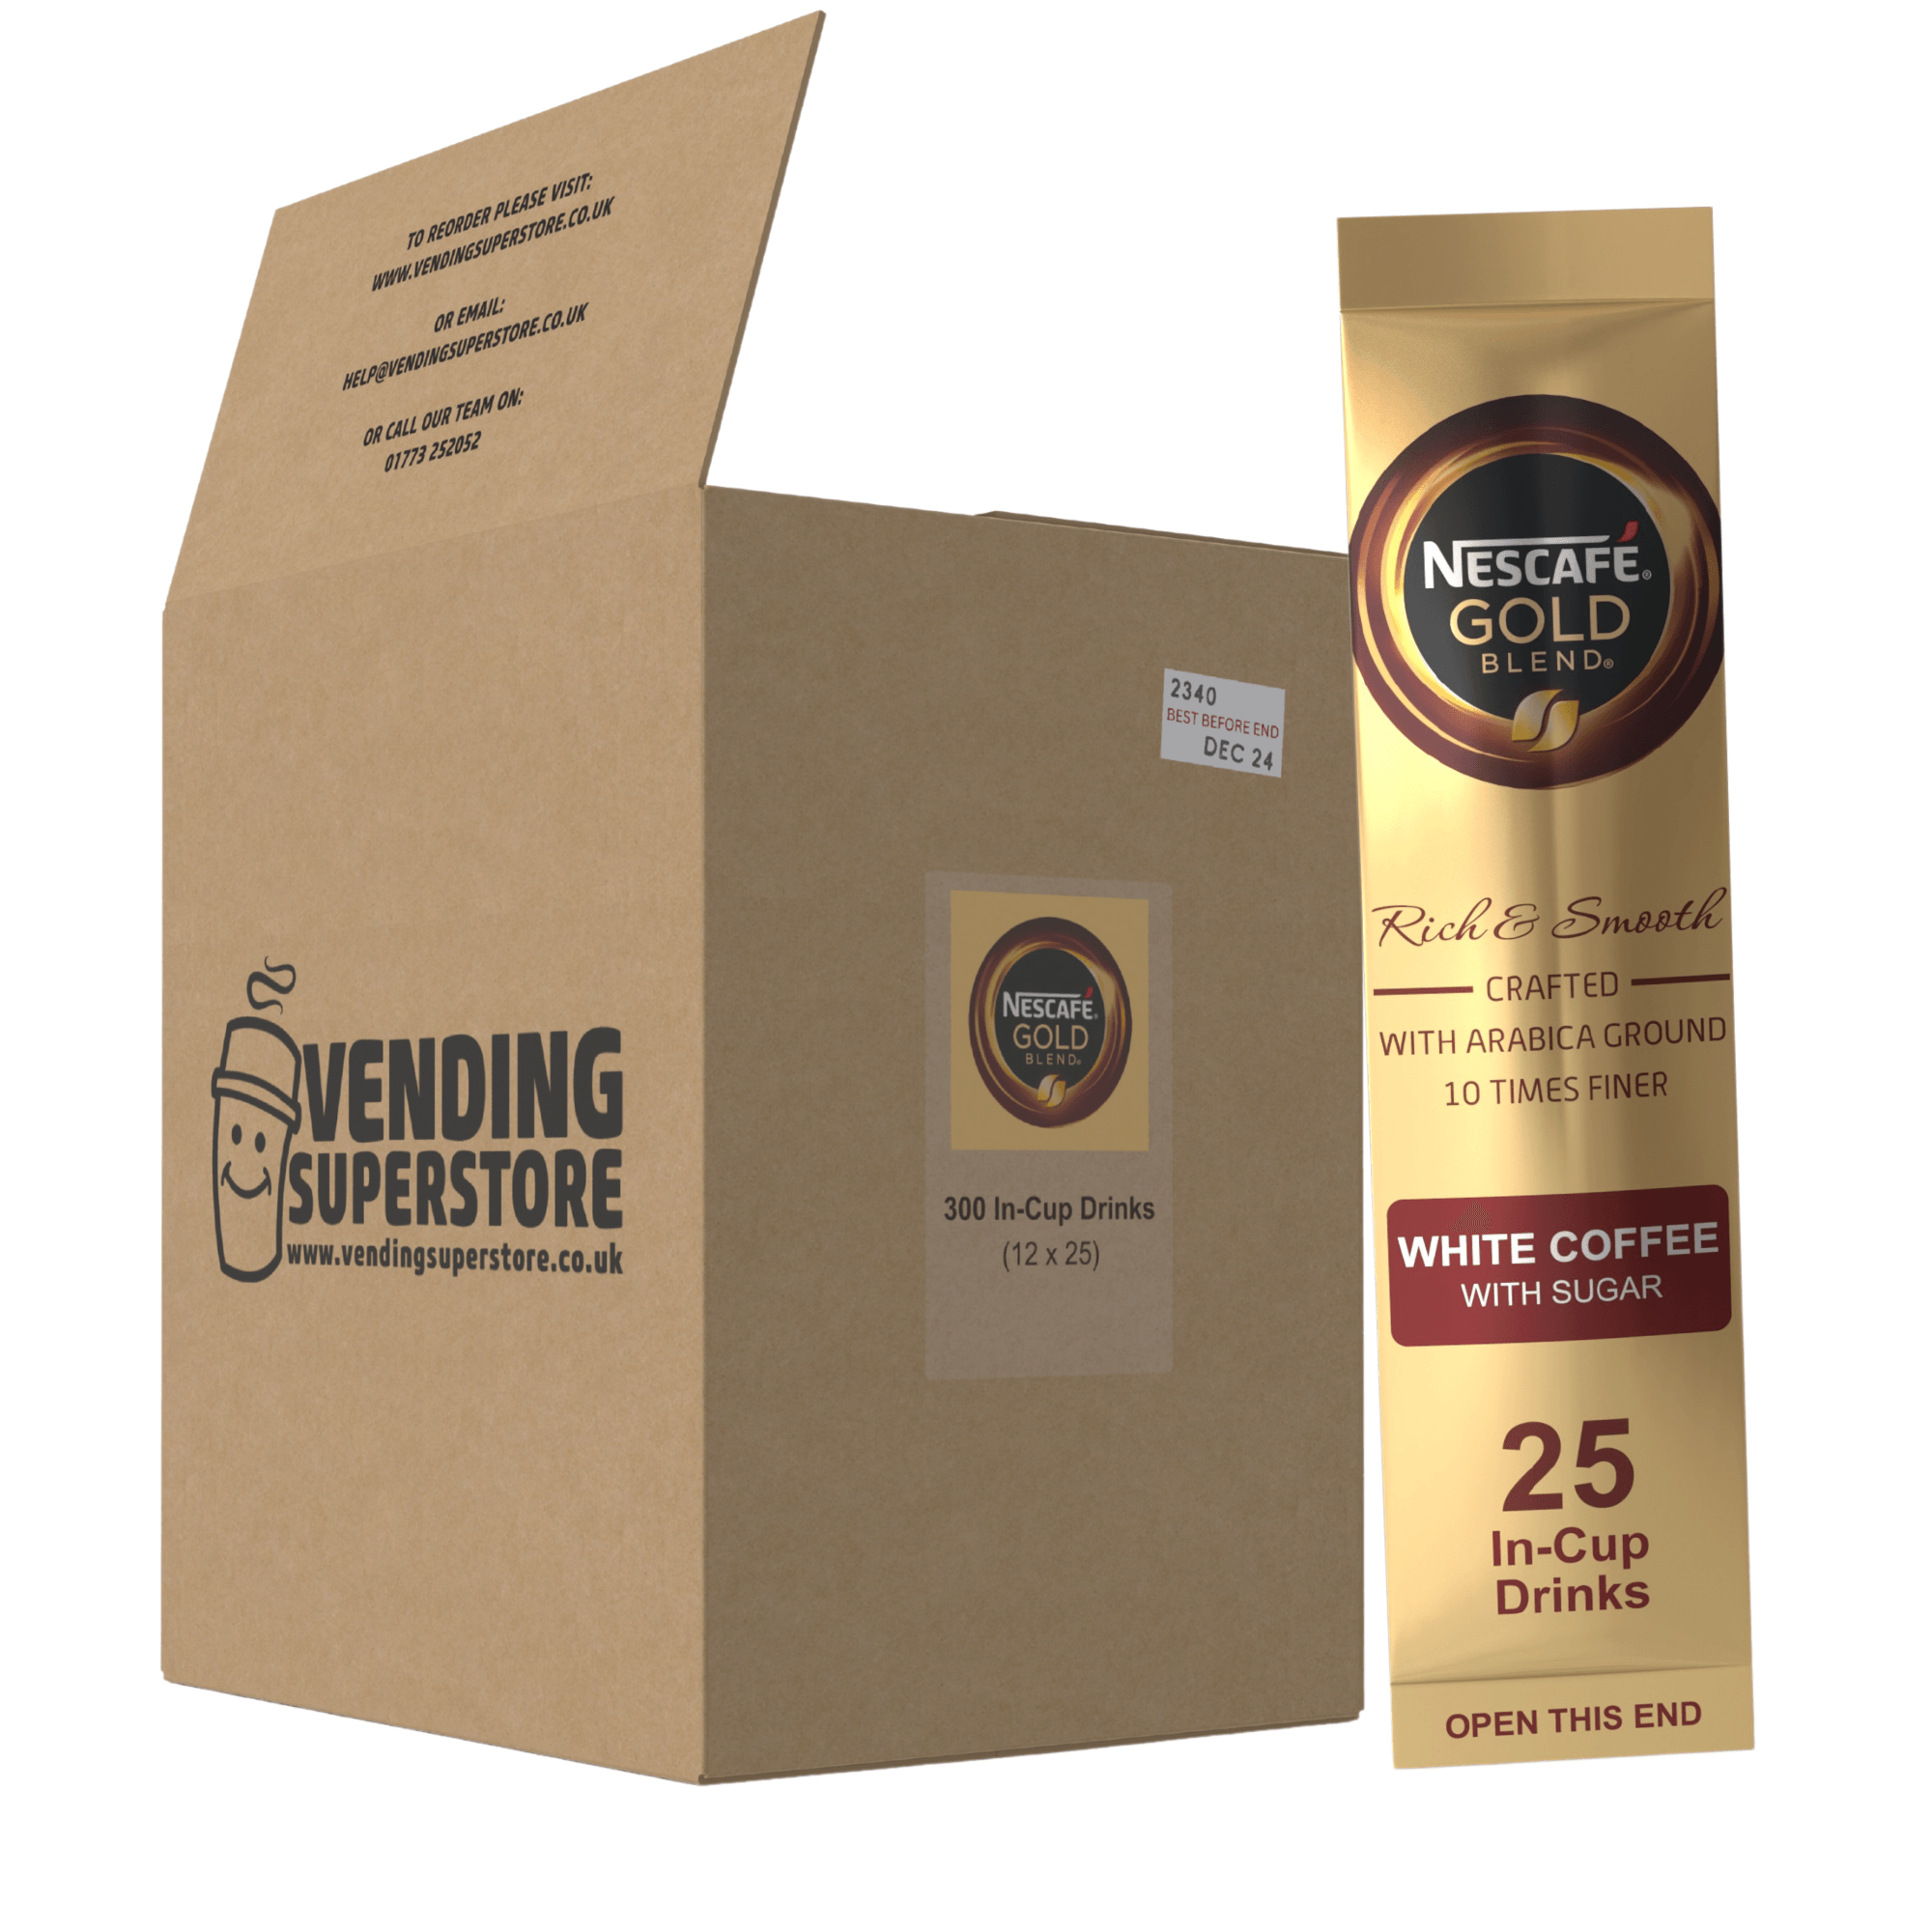 Incup Vending Drinks - Nescafe Gold Blend White Coffee With Sugar - Case Of 300 Cups - Vending Superstore